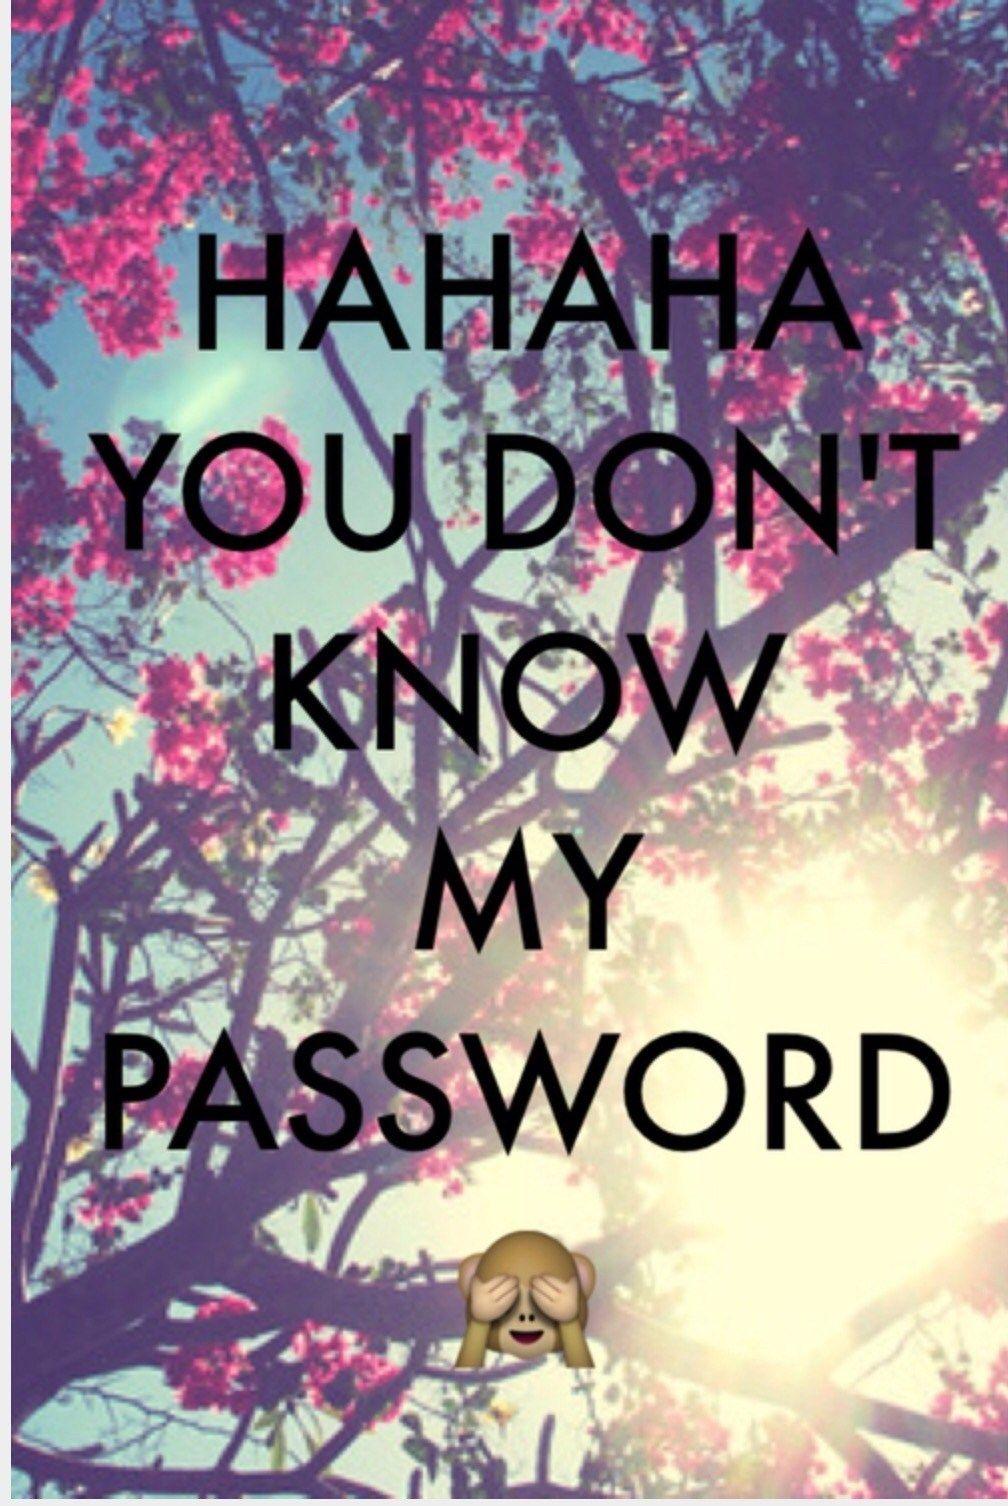 Free You Know My Password Wallpaper, You Know My Password Wallpaper  Download - WallpaperUse - 1